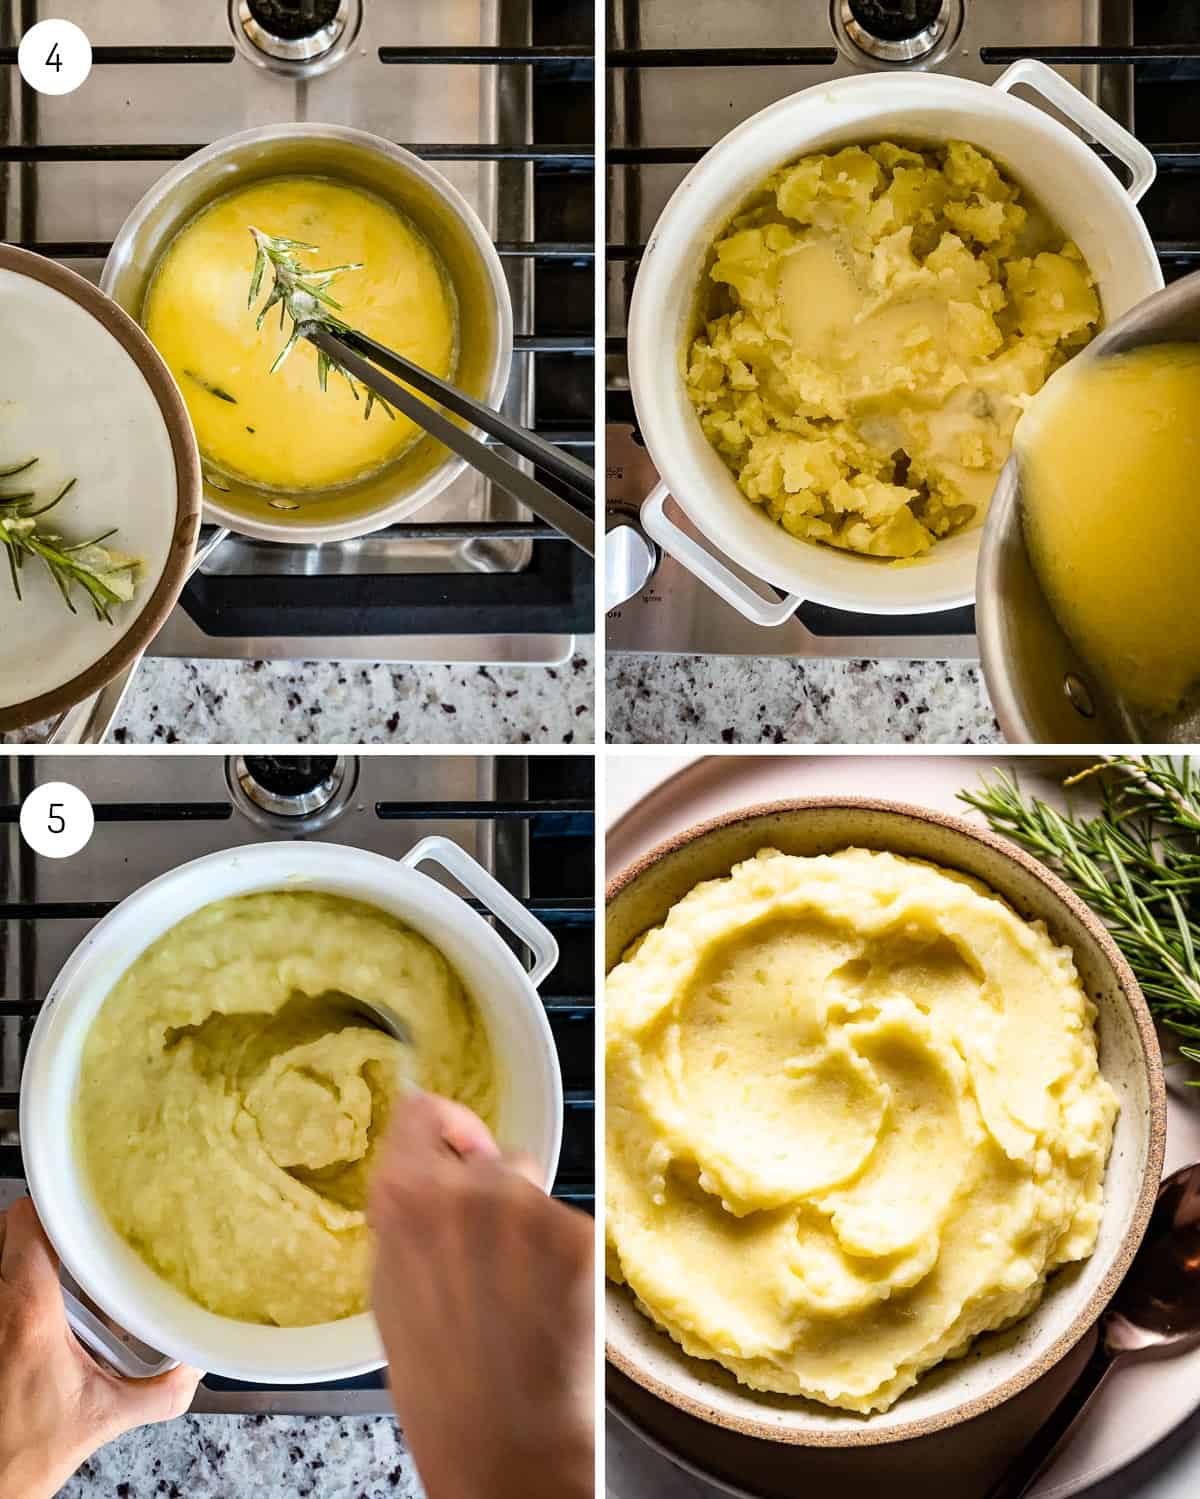 A person adding rosemary infused butter to mashed potatoes on the stove.